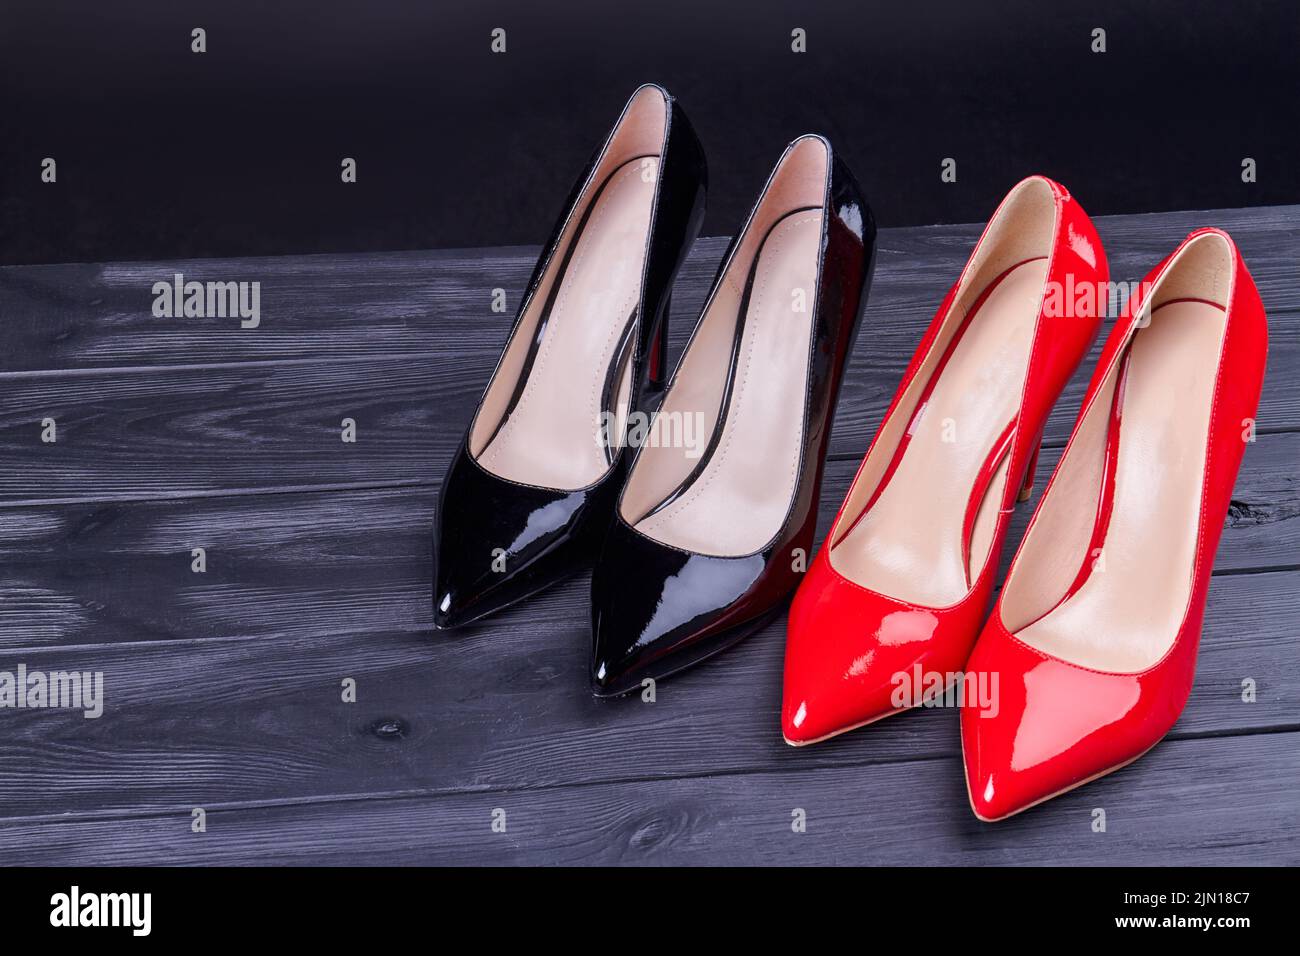 Pair of red and black high heel shoes. Shiny female footwear. Stock Photo